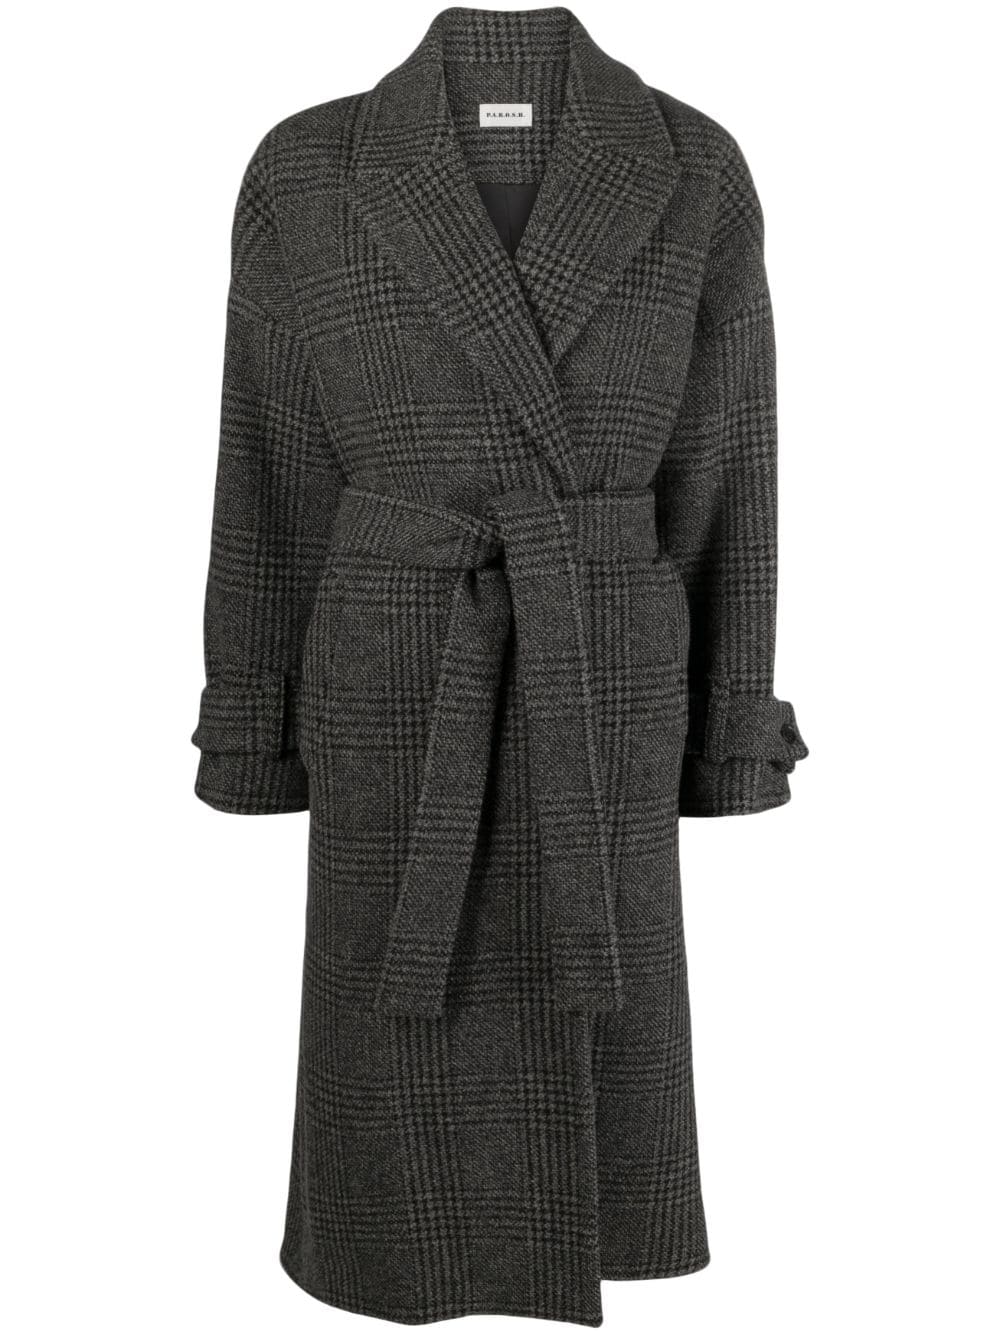 P.A.R.O.S.H. plaid-check pattern belted trench coat - Grey von P.A.R.O.S.H.